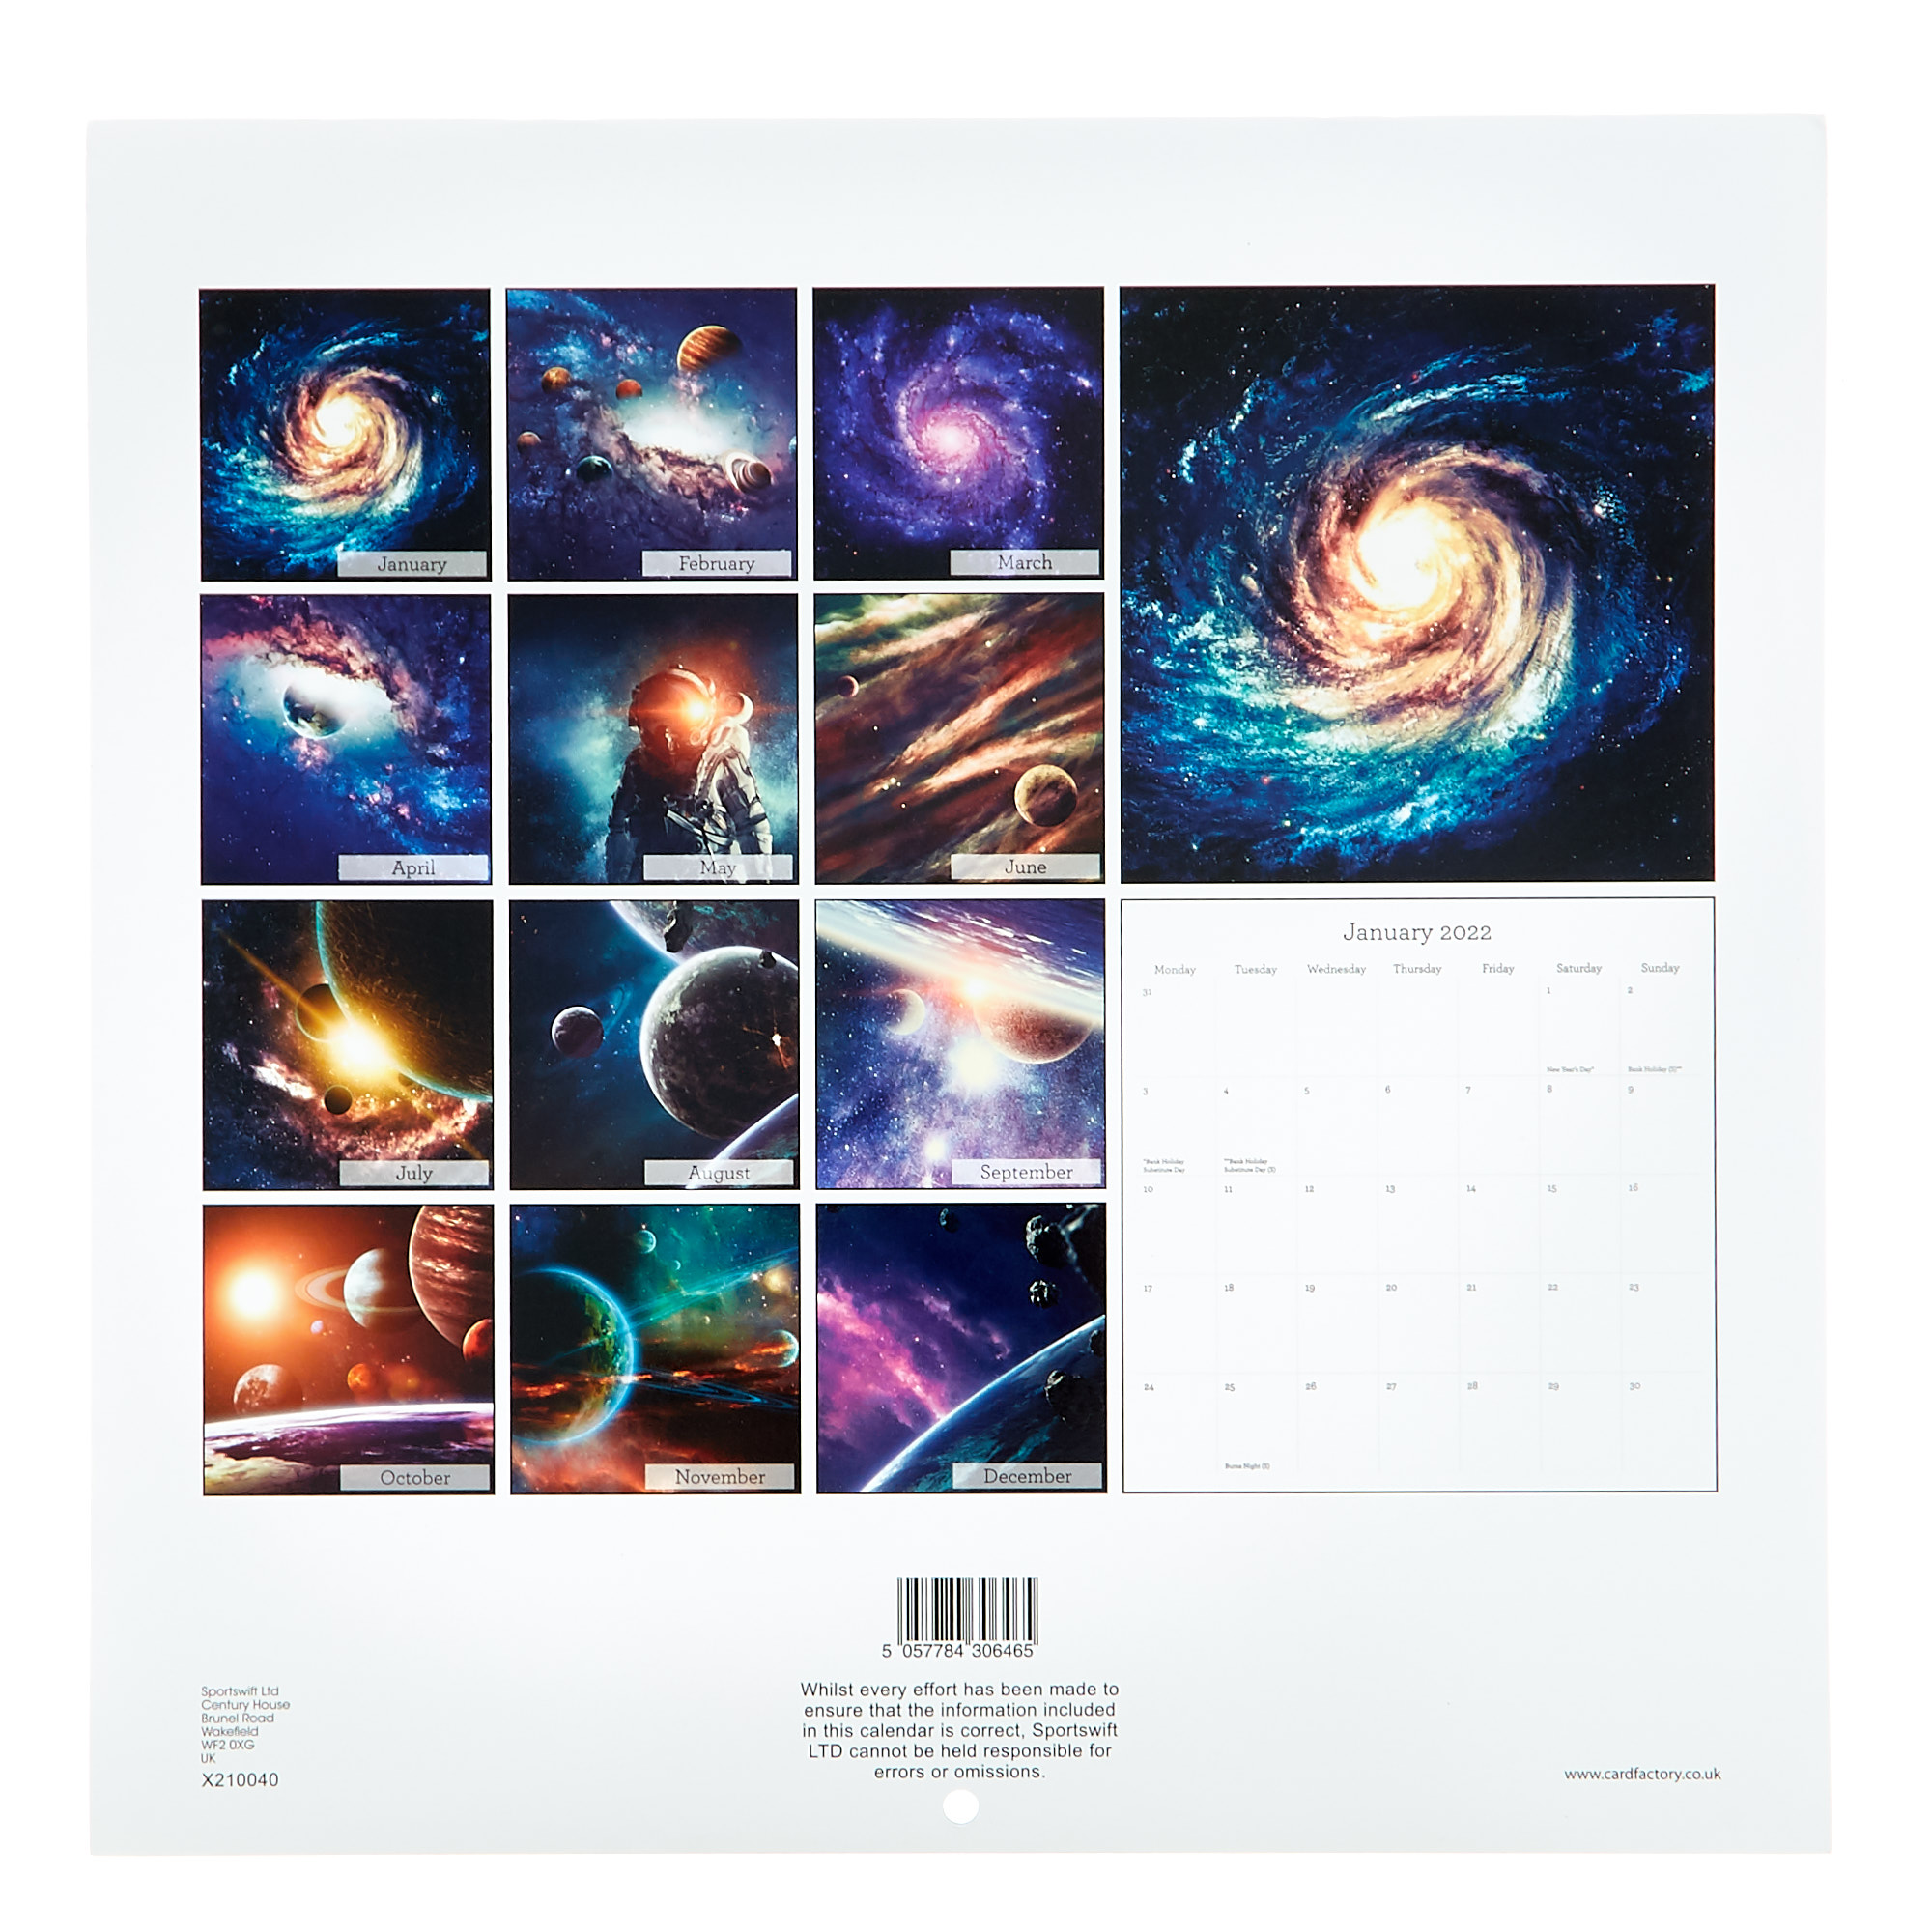 Space Calendar 2022 Buy Square 2022 Space Calendar For Gbp 2.00 | Card Factory Uk